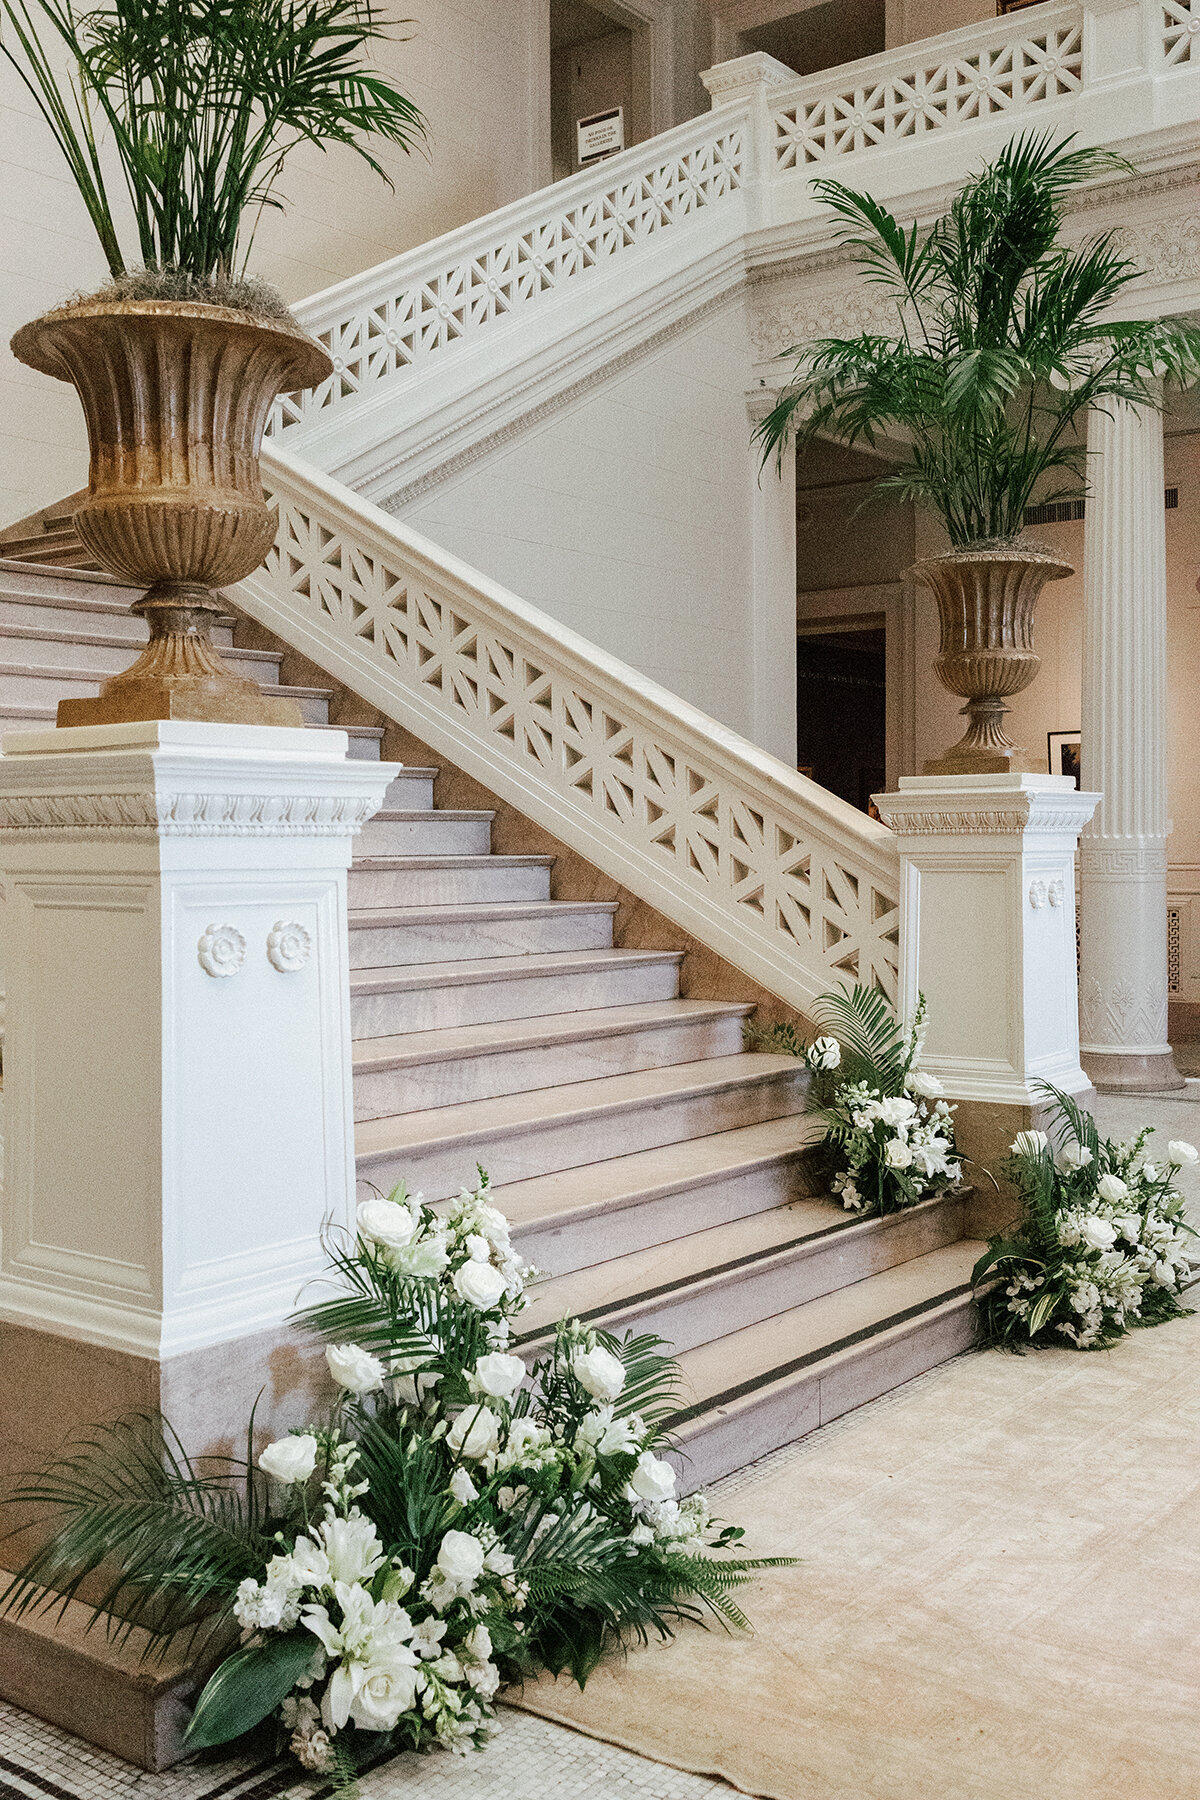 Sumner + Scott - New Orleans Museum of Art Wedding - Luxury Event Planning by Michelle Norwood - 12